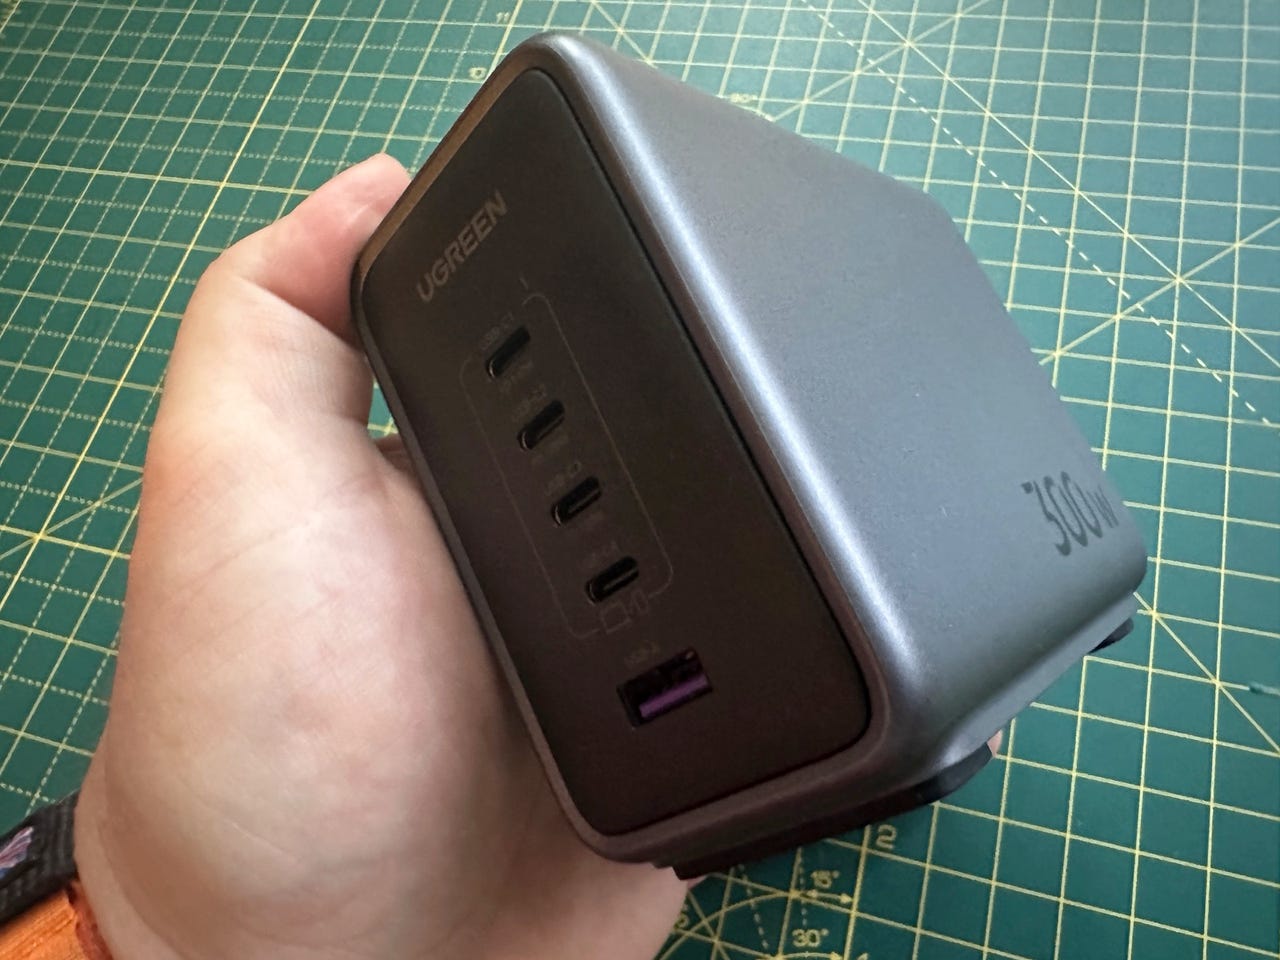 This beast of a USB-C charger can power 3 laptops, and it's $70 off for  Cyber Monday